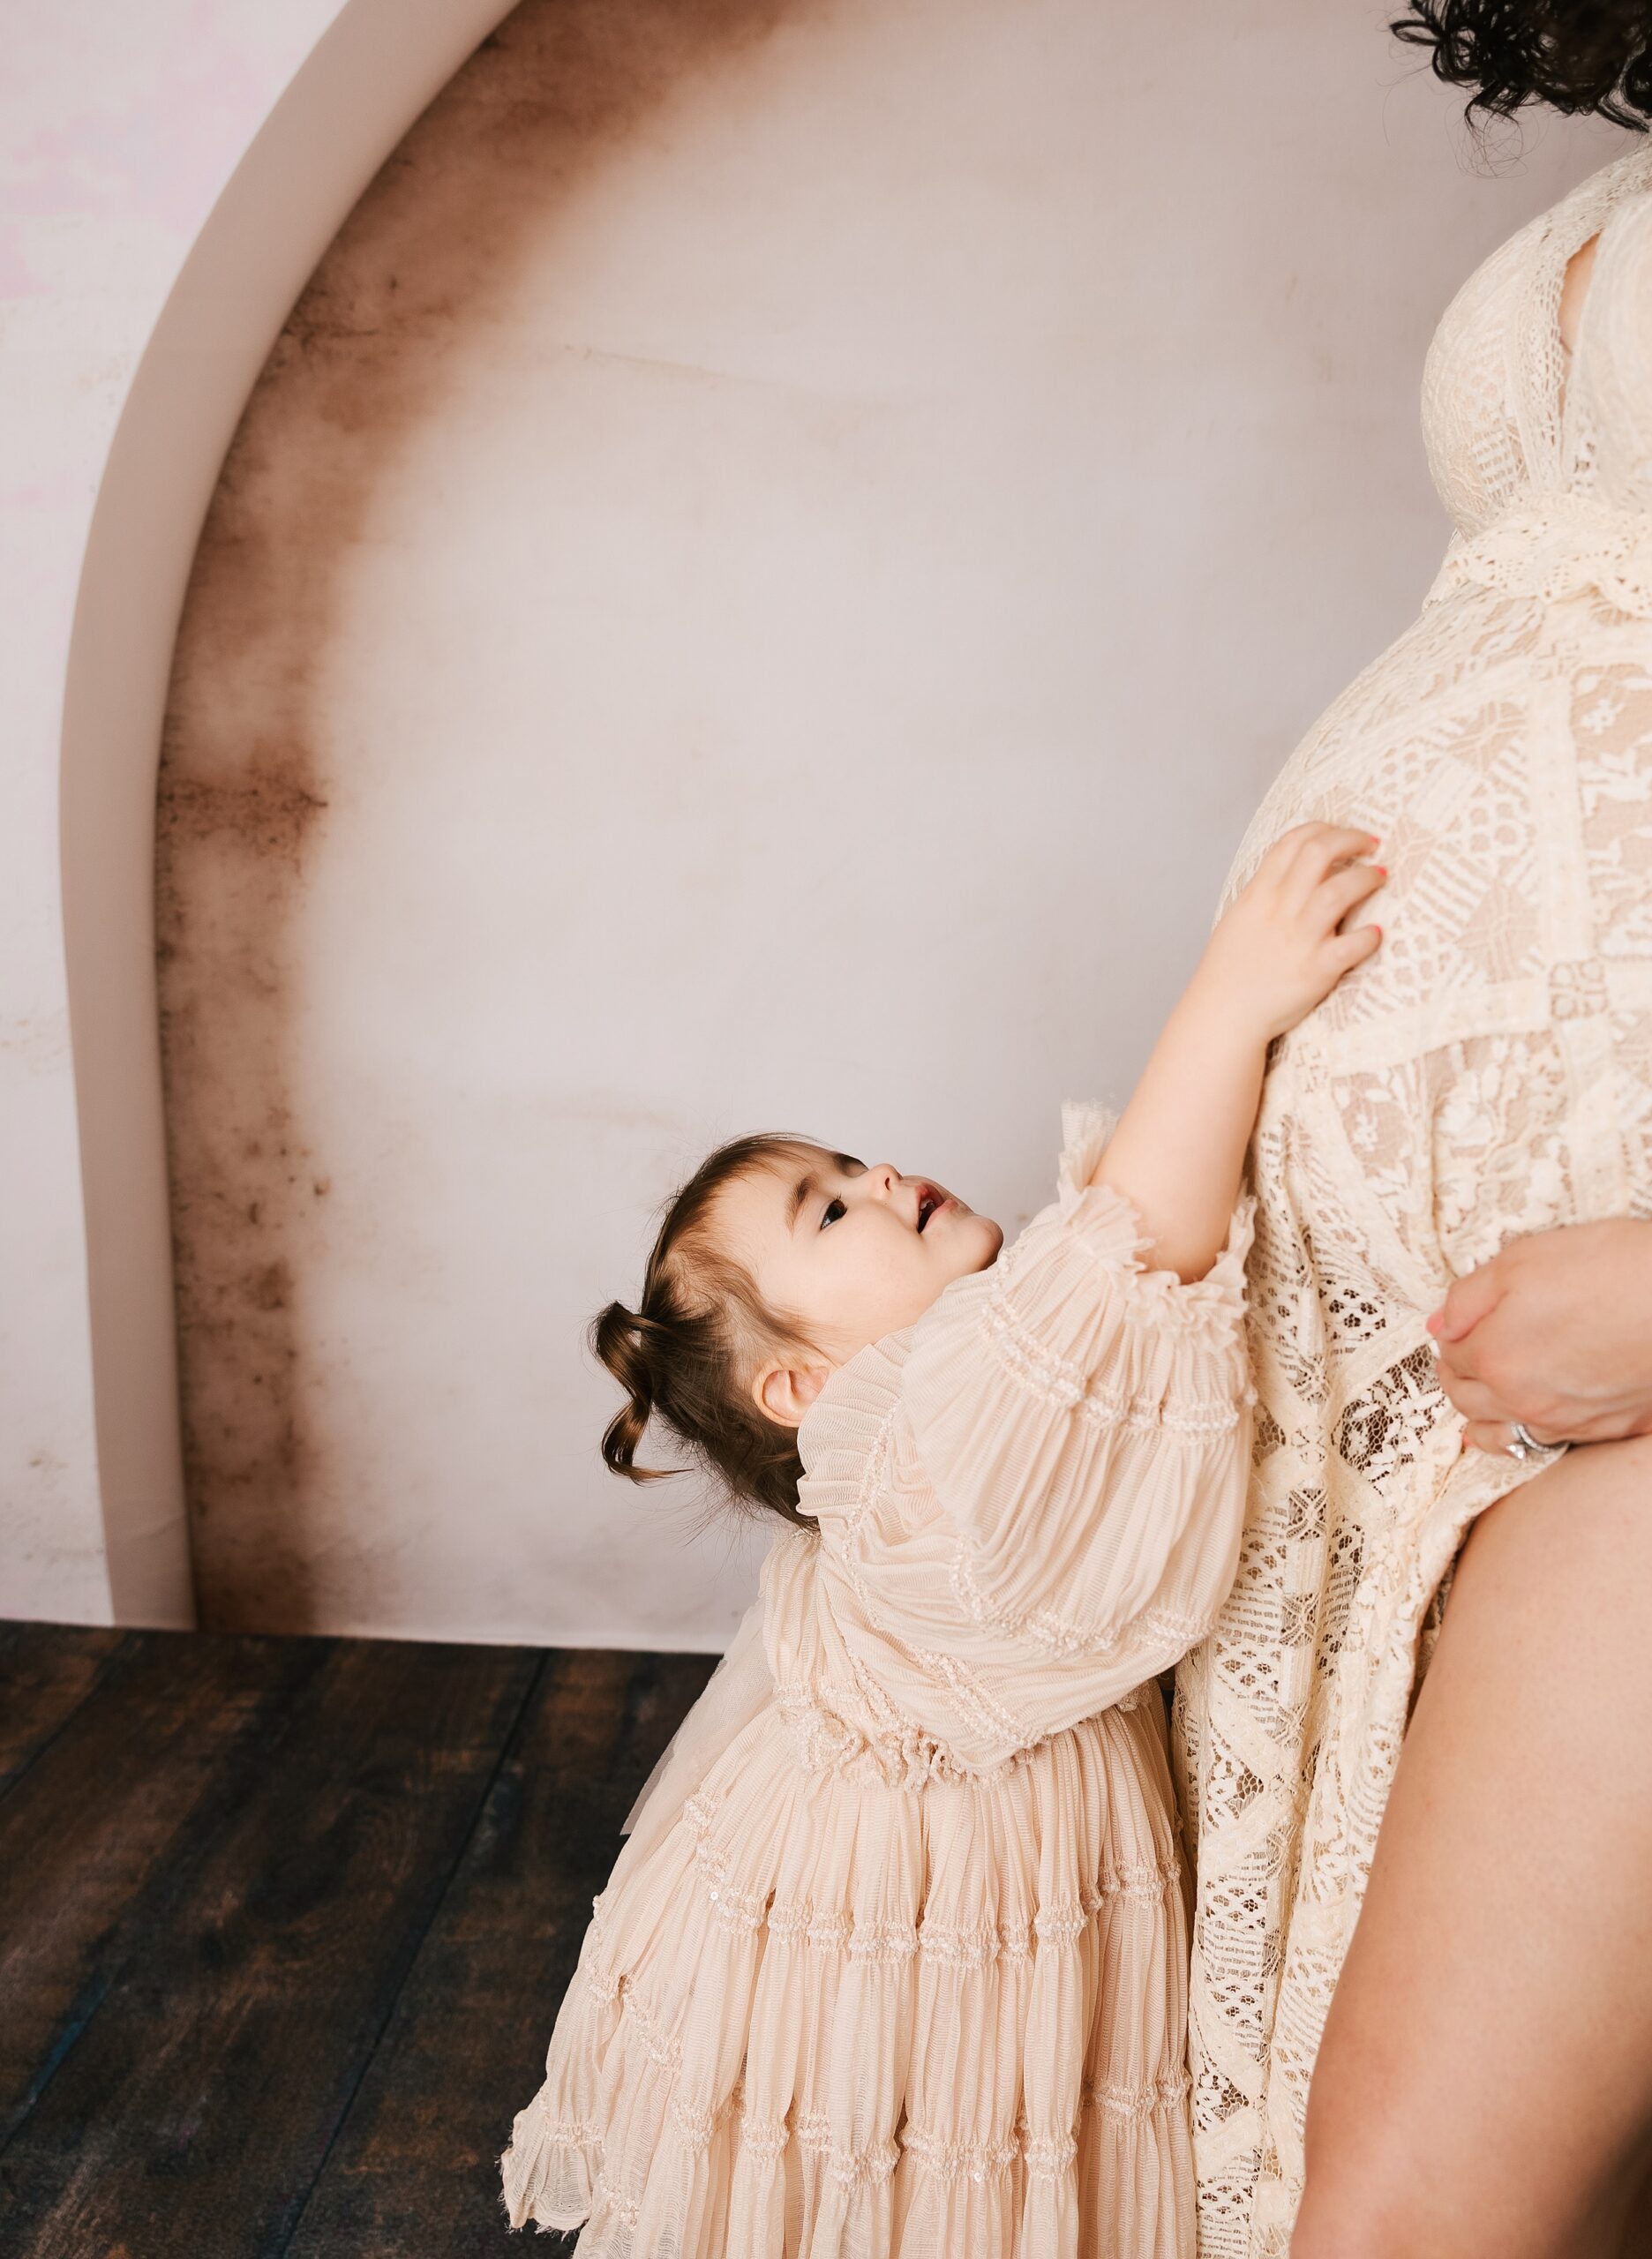 A toddler girl in a cream dress reaches up to mom's pregnant bump while in a studio after visiting with labor of love doula services